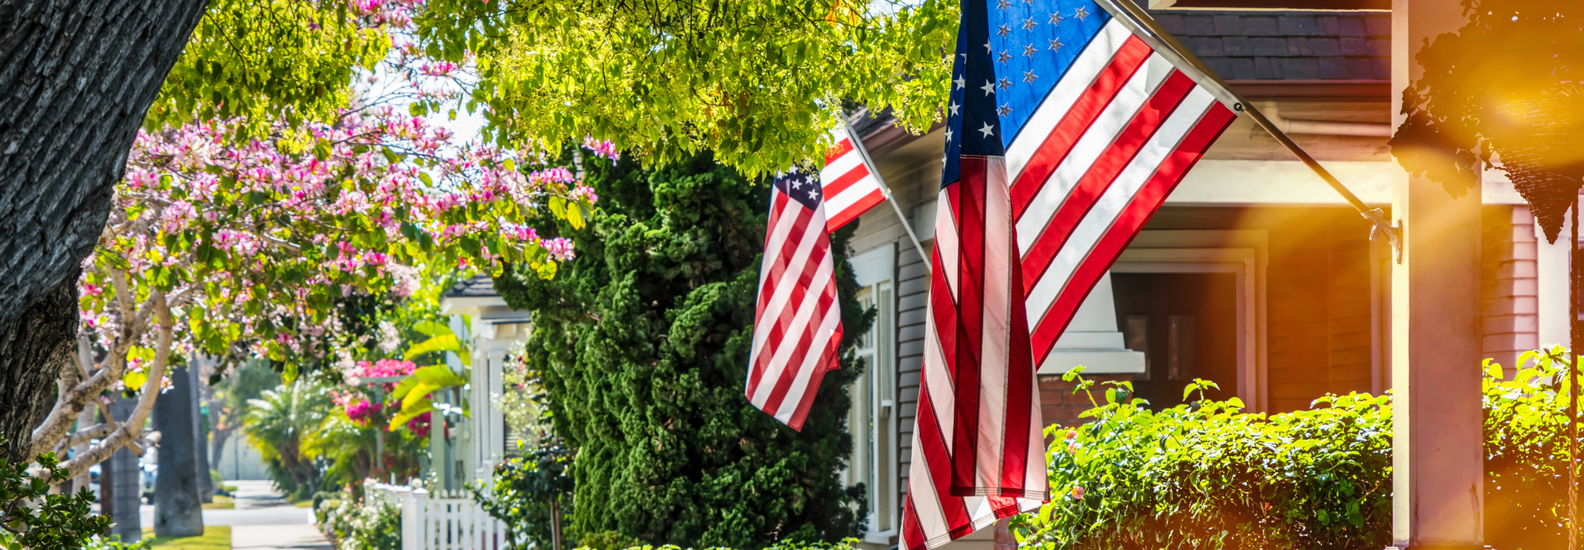 American Flags on a residential street